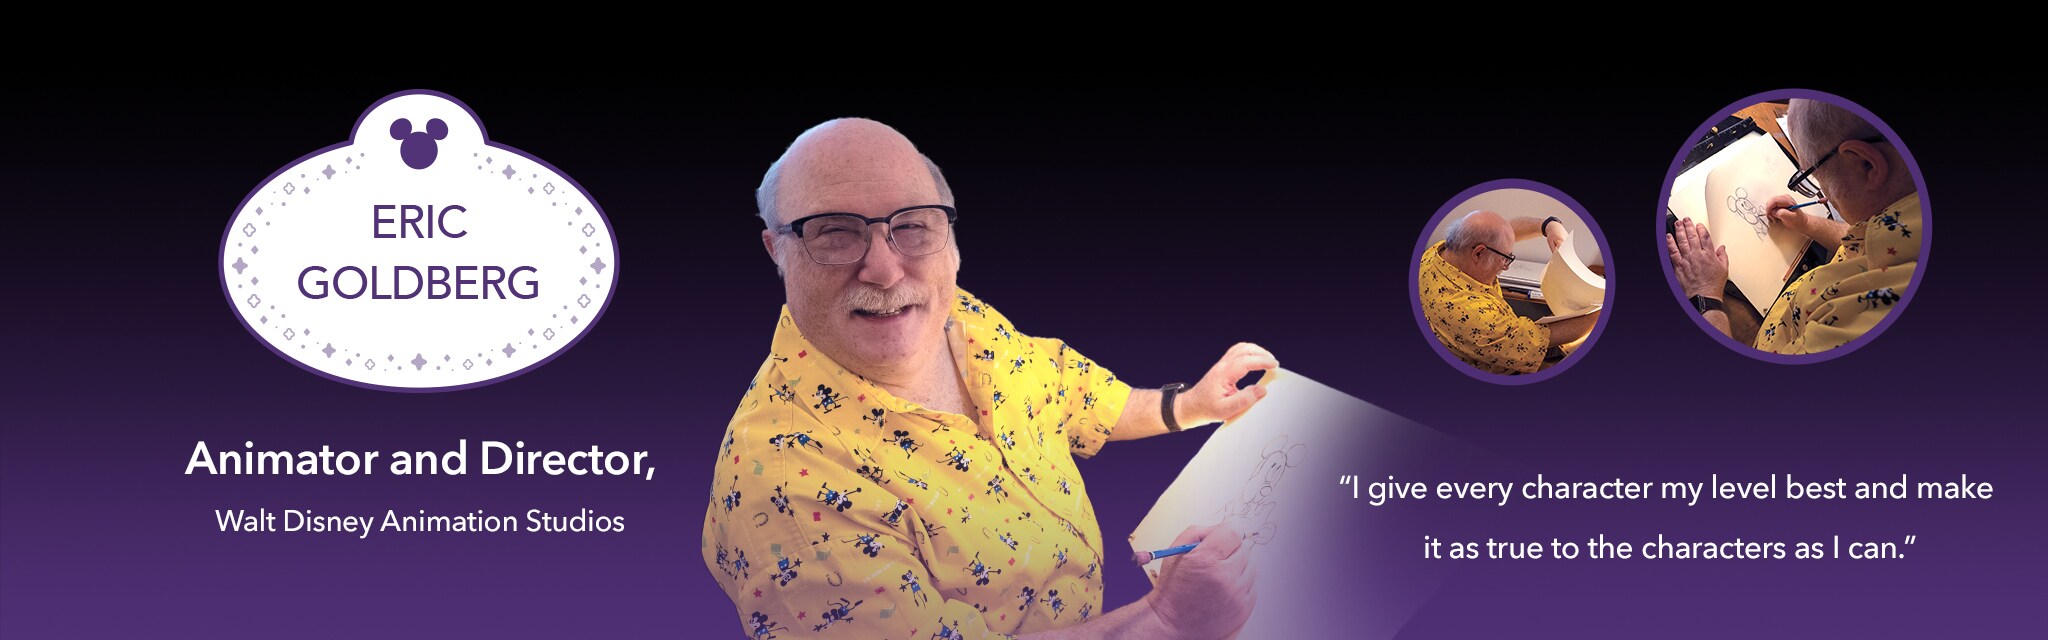 Eric Goldberg, Animator and Director, Walt Disney Animation Studios: I give every character my level best and make it as true to the character as I can.